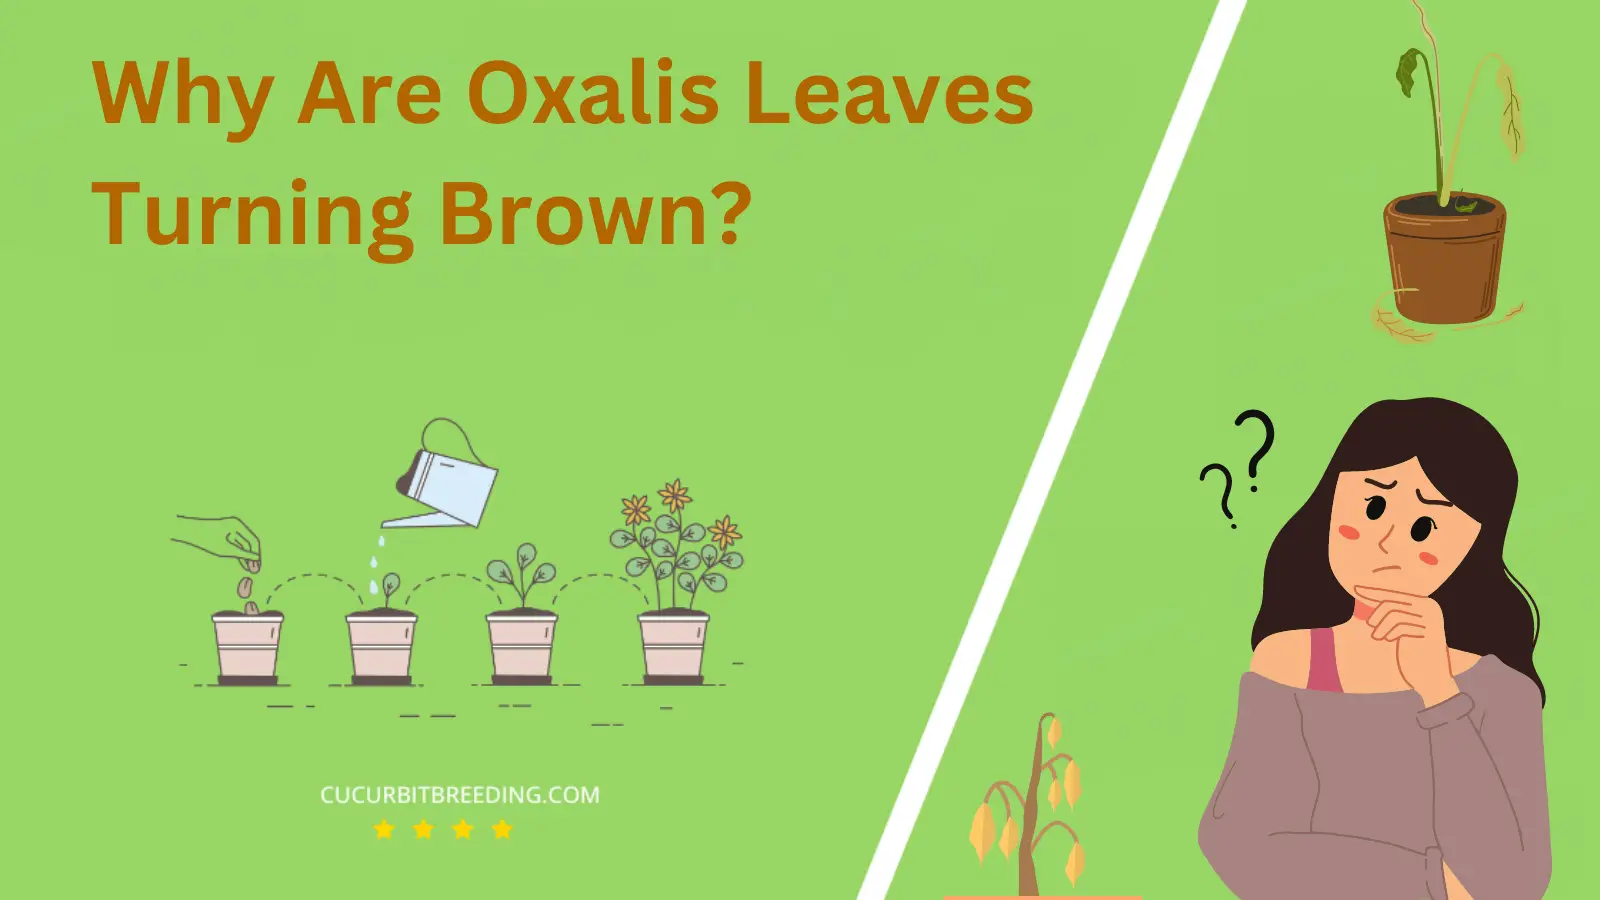 Why Are Oxalis Leaves Turning Brown